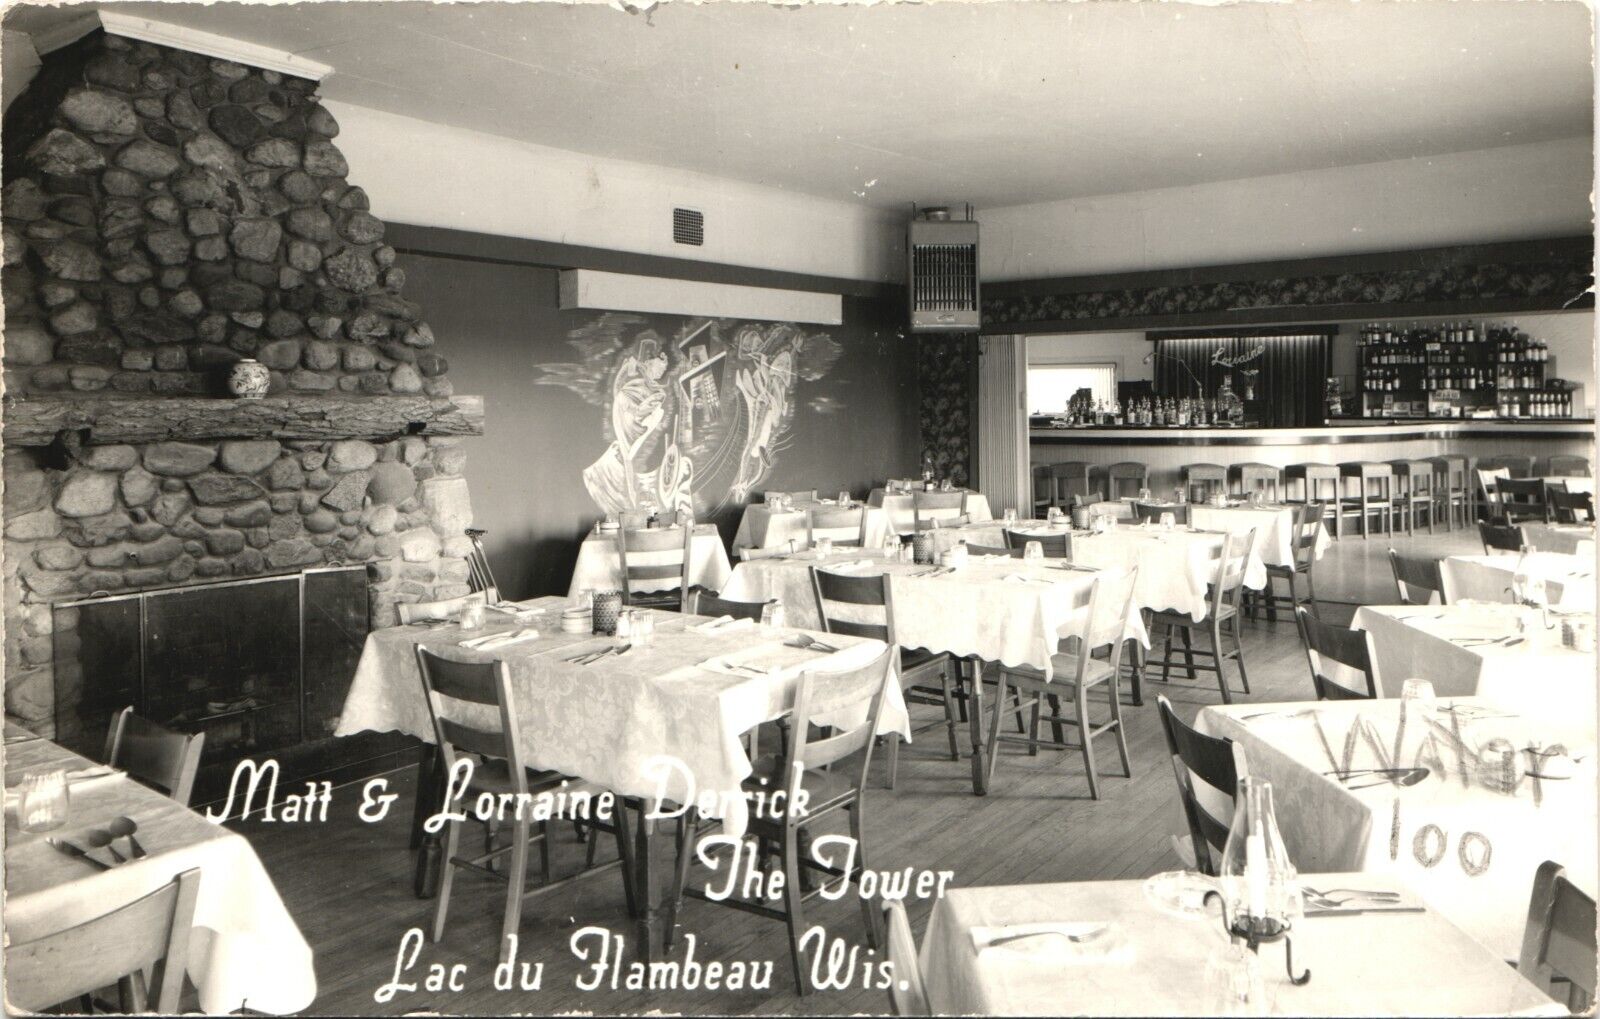 THE TOWER DINER & SALOON real photo postcard rppc FLAMBEAU WISCONSIN WI 1920 bar